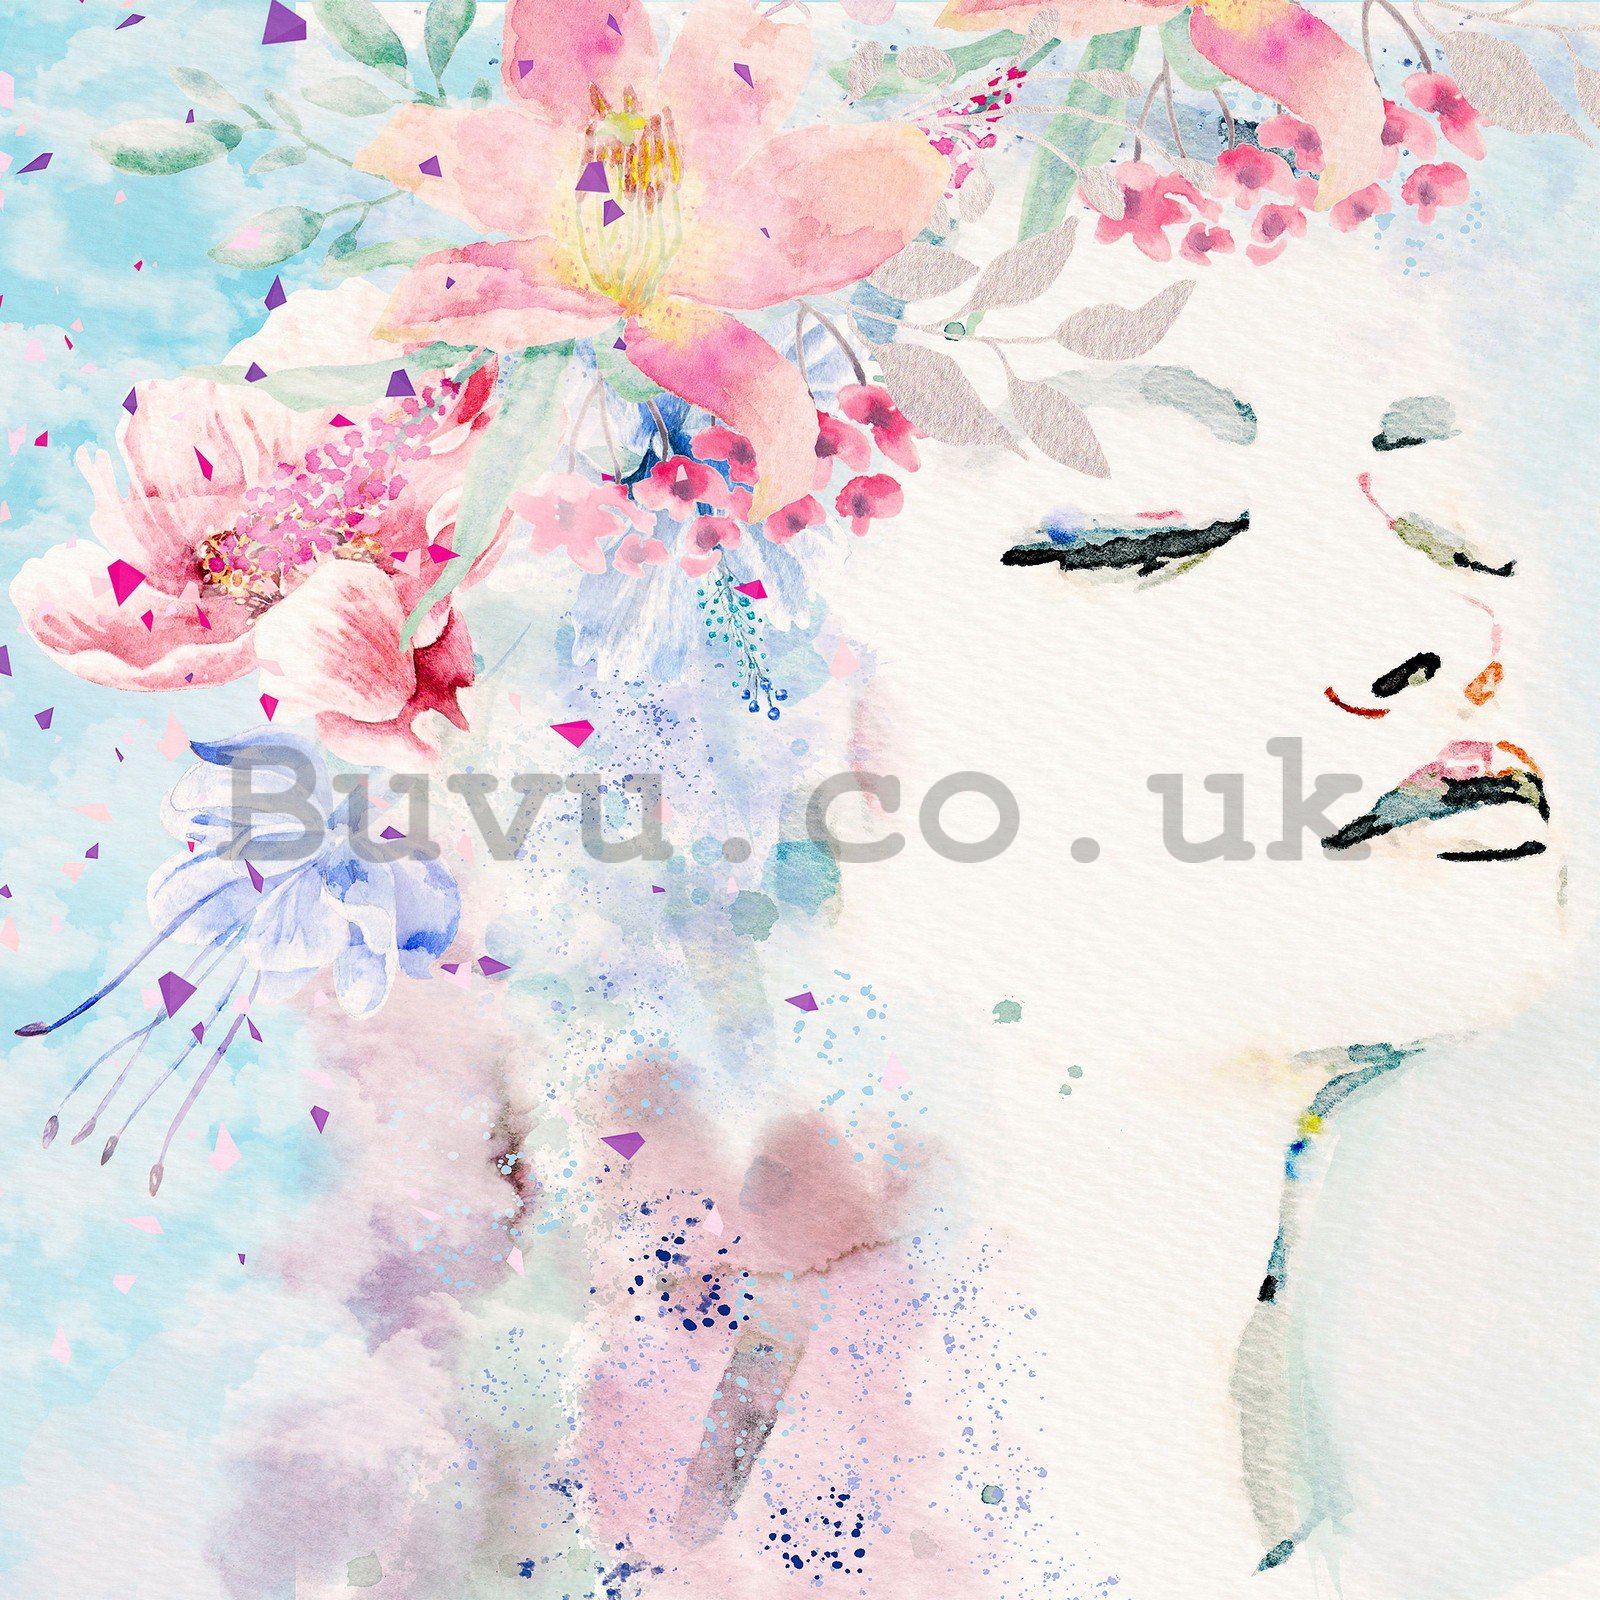 Wall mural vlies: Woman with flowers - 416x254 cm